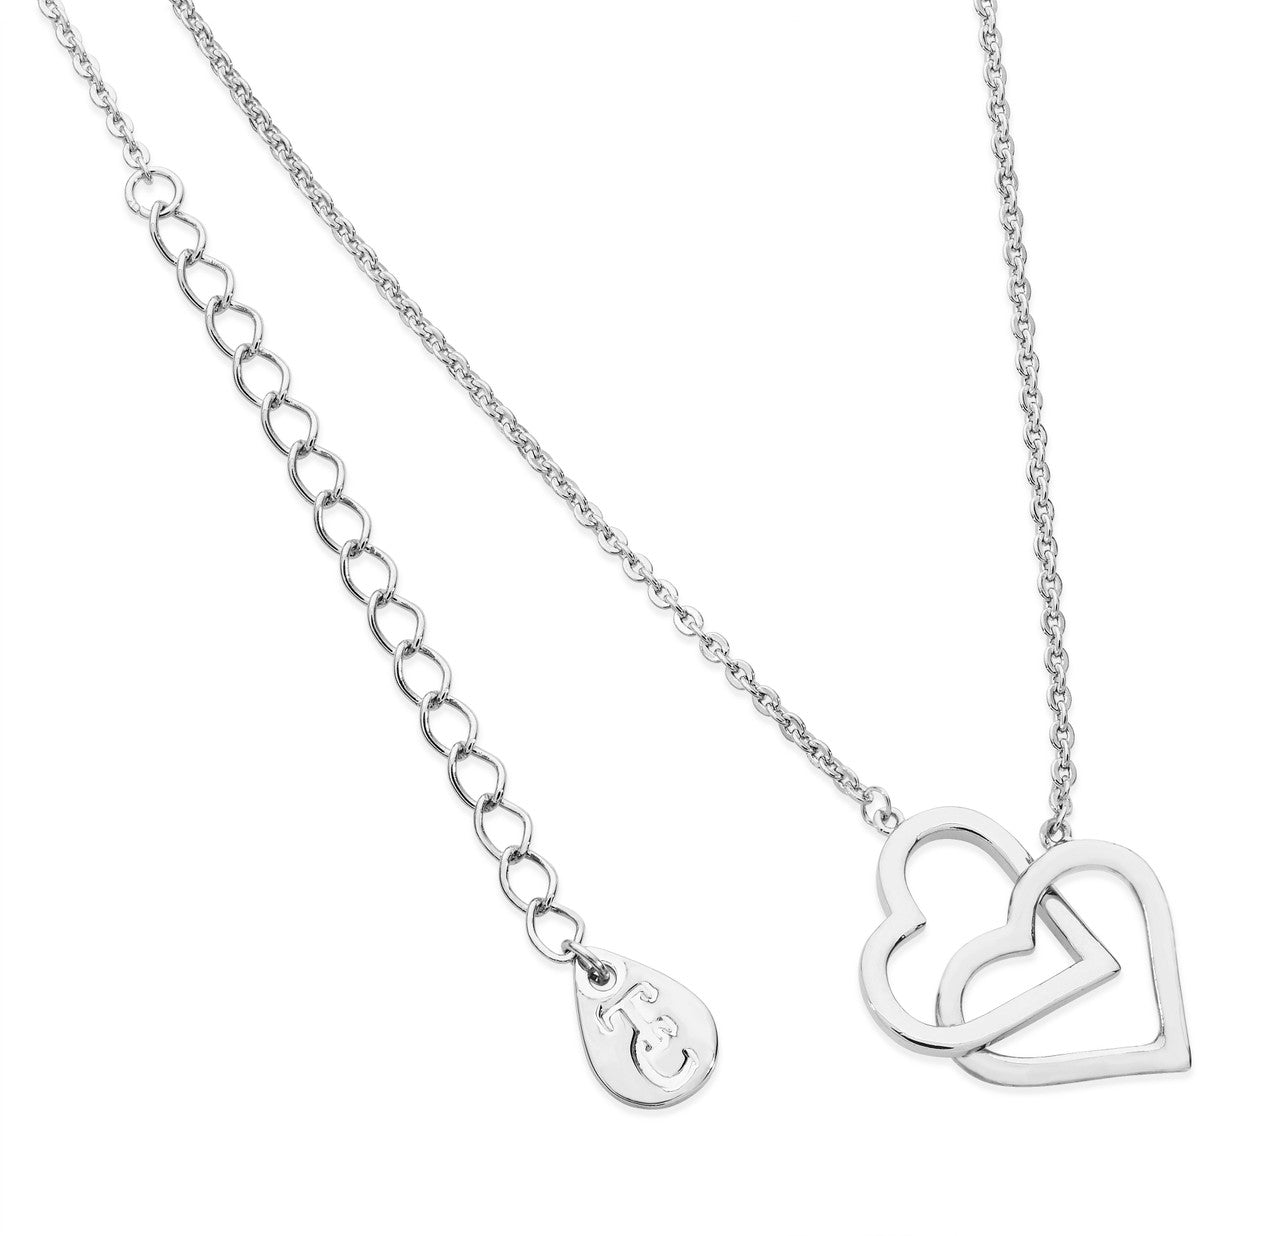 Tipperary Crystal Pendant - Sterling Silver Collection - Interlocking Heart